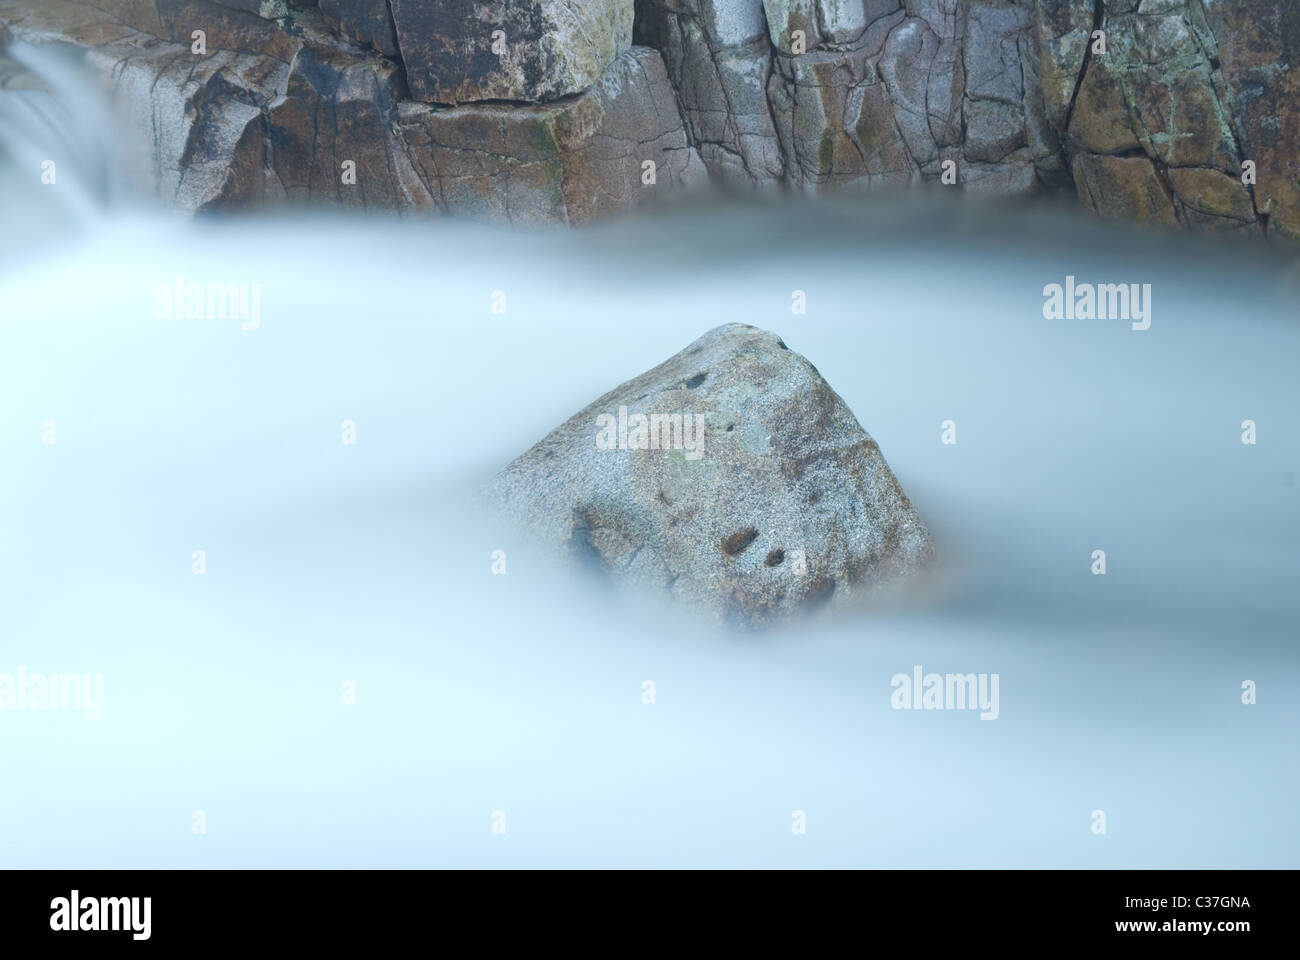 A rock stands in the river as the water flows past (time exposure) Stock Photo